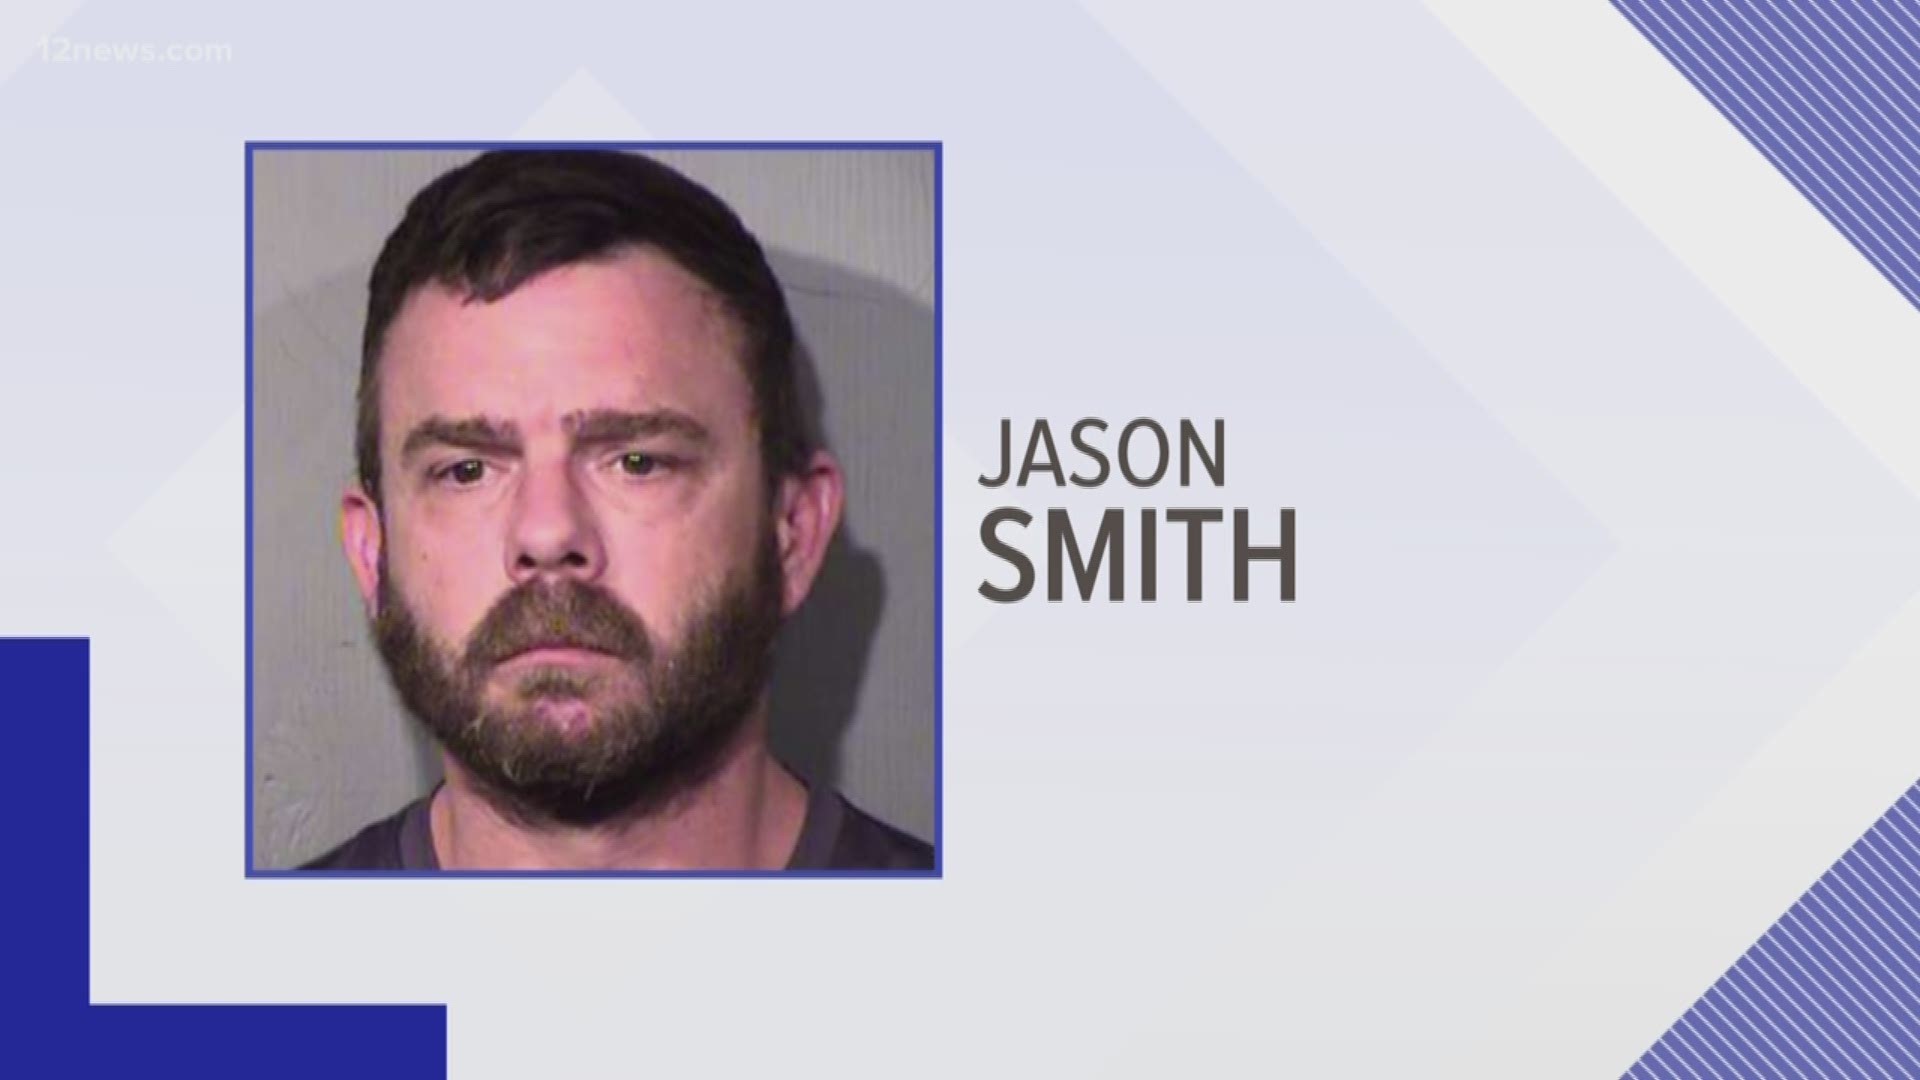 Jason Smith is accused of beating a woman inside a sex dungeon inside his Scottsdale home. The police report details rough treatment including electric shock, whippings and forcing the woman to sleep in a cage. He denies the allegations.